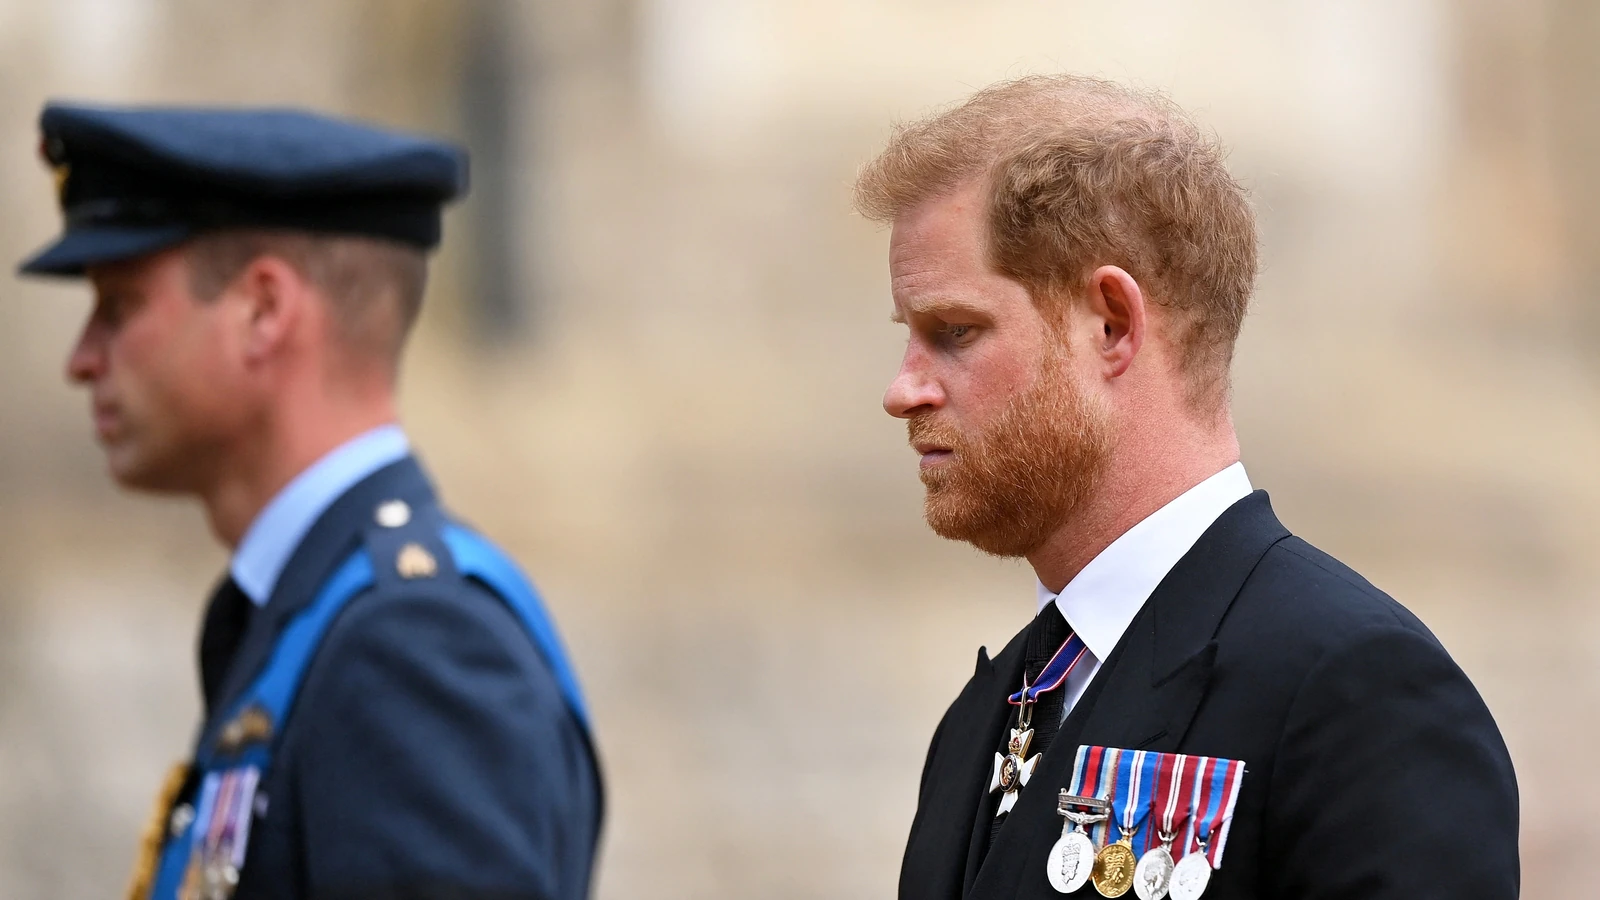 IT’S WAR!  Prince Harry takes a taunt at the royal family for lying to protect Prince William in new trailer

+2023